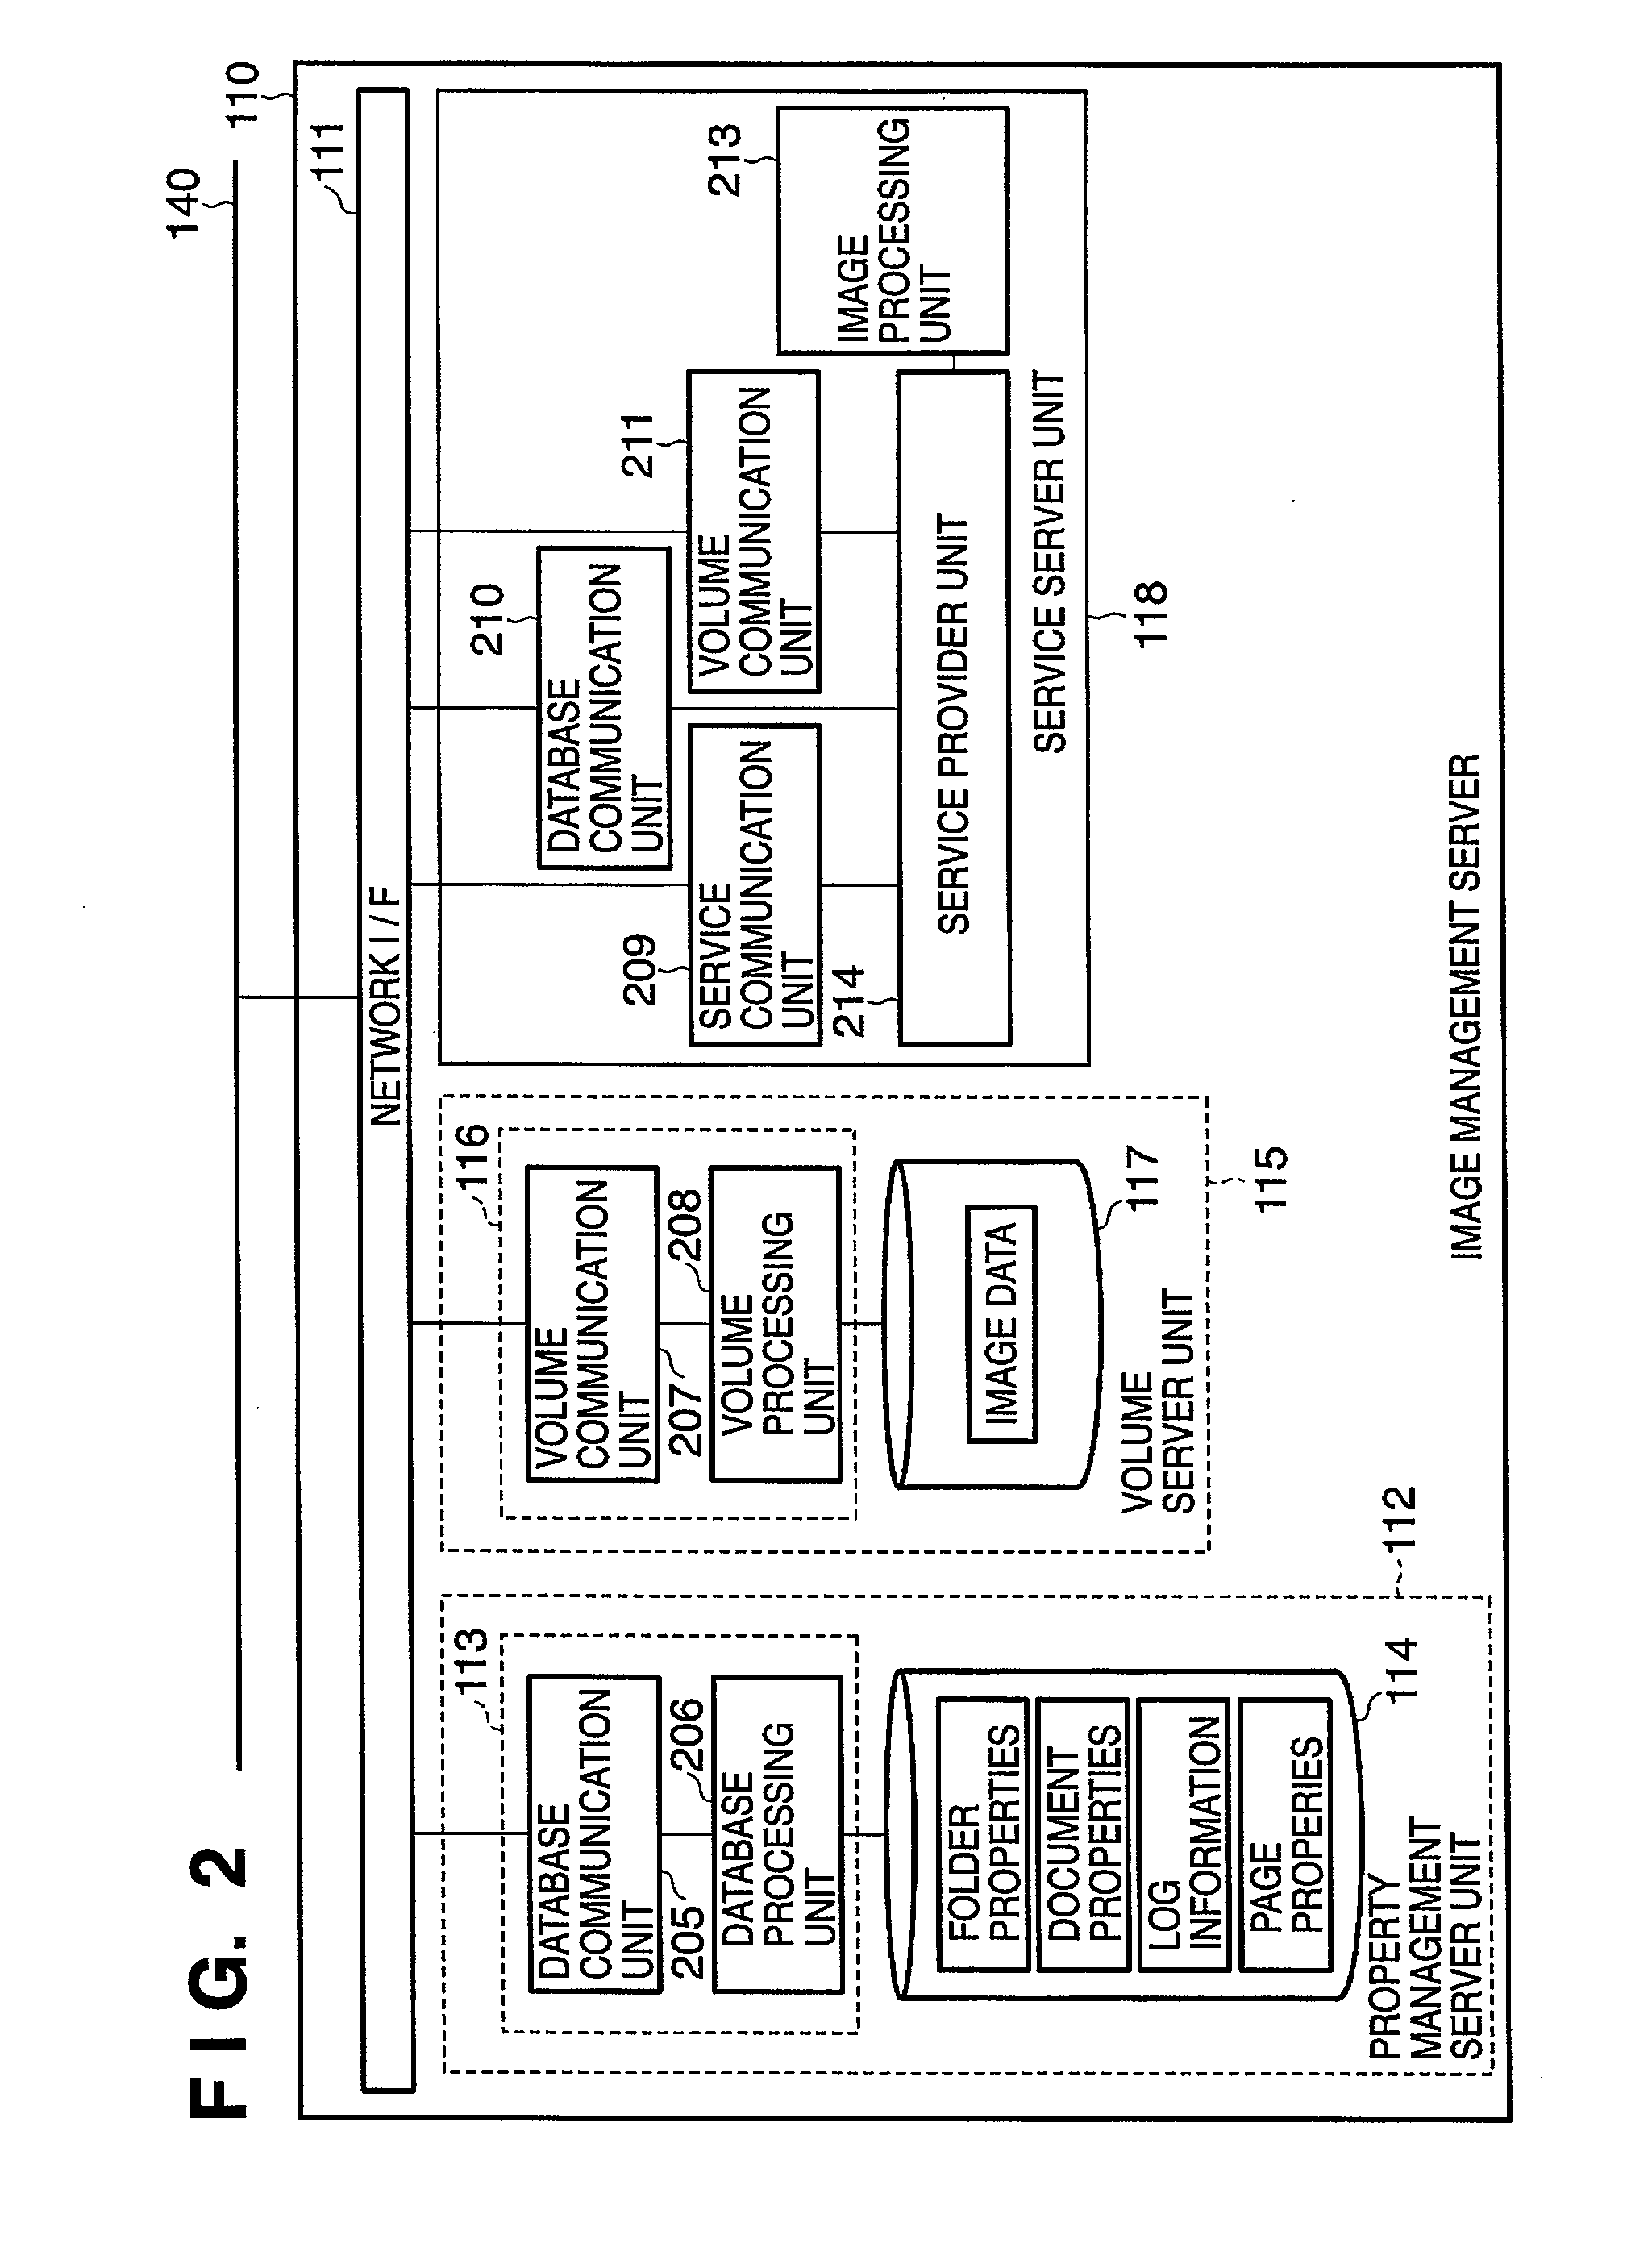 Image processing system, image processing apparatus, and image processing method